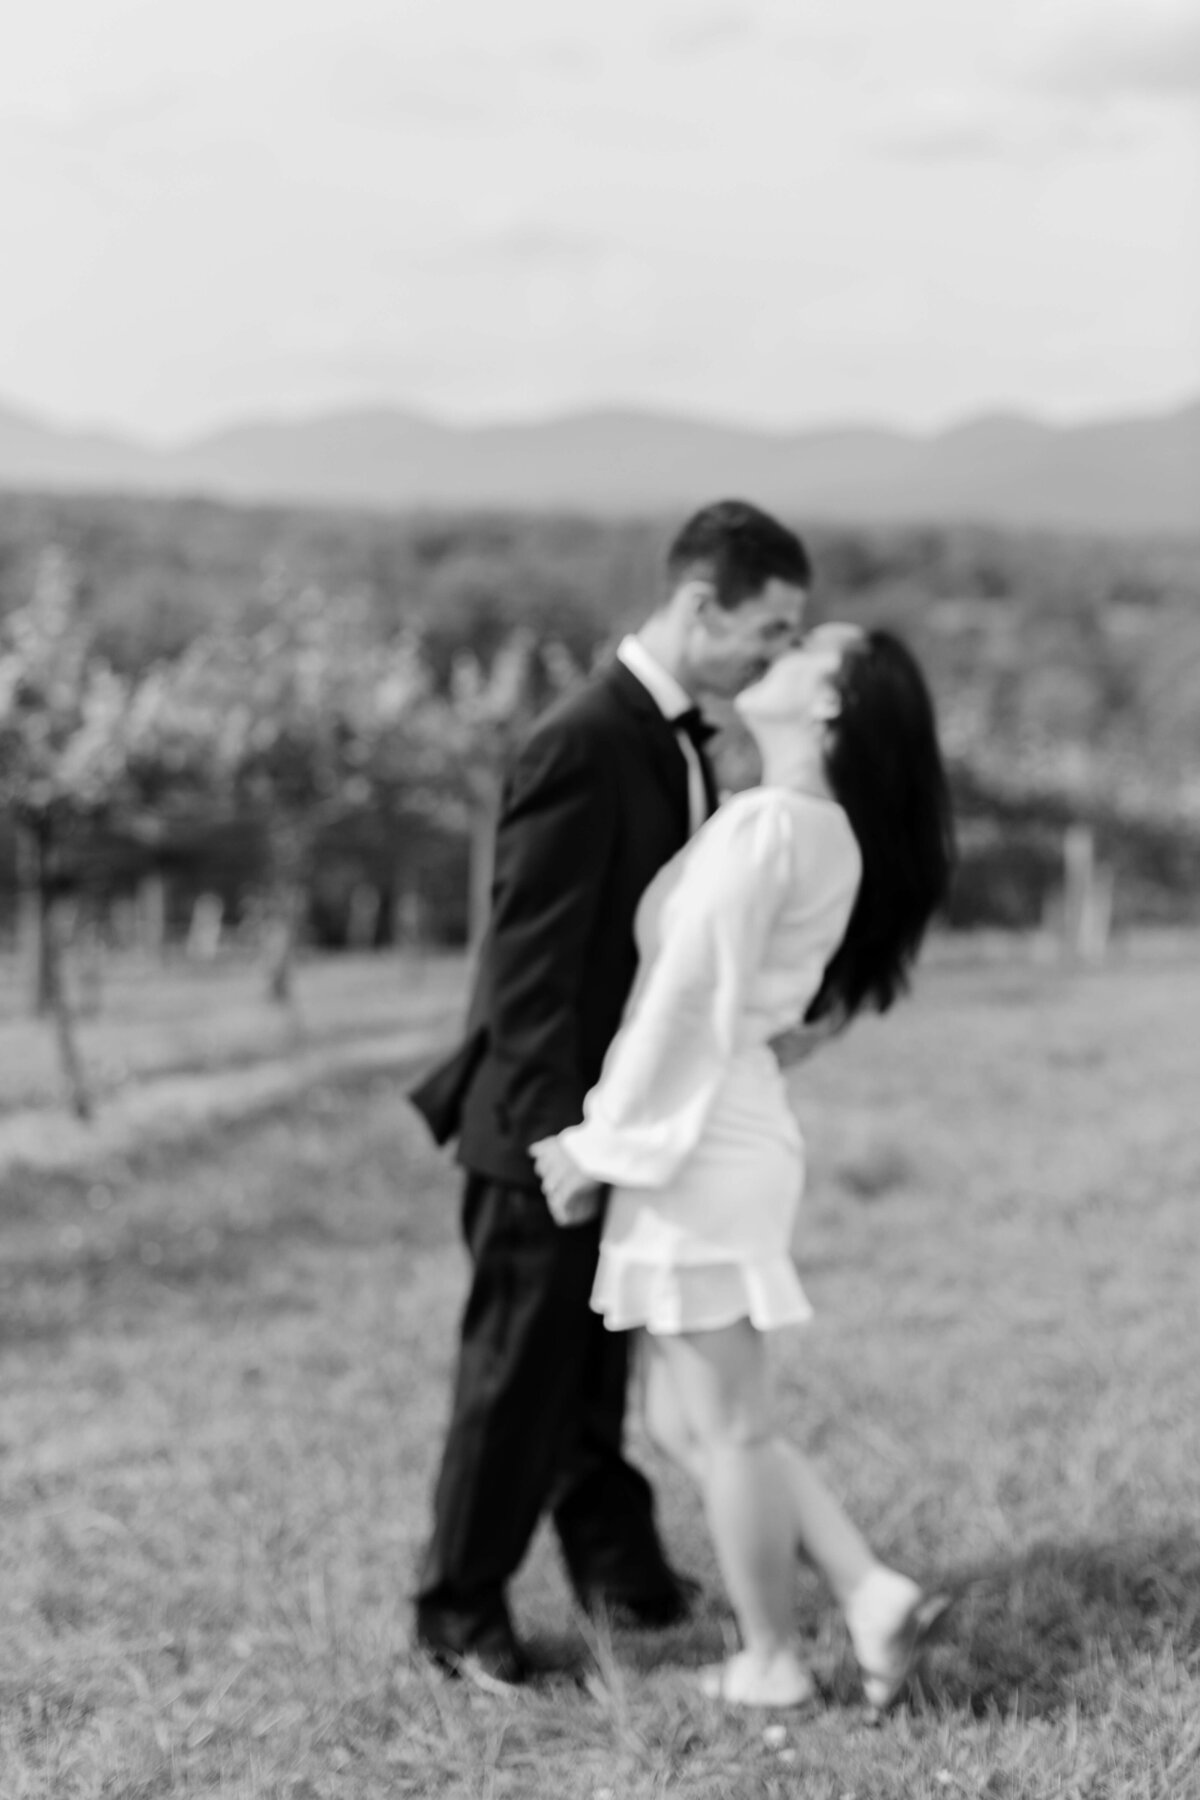 A bride and groom kiss over looking the mountains.